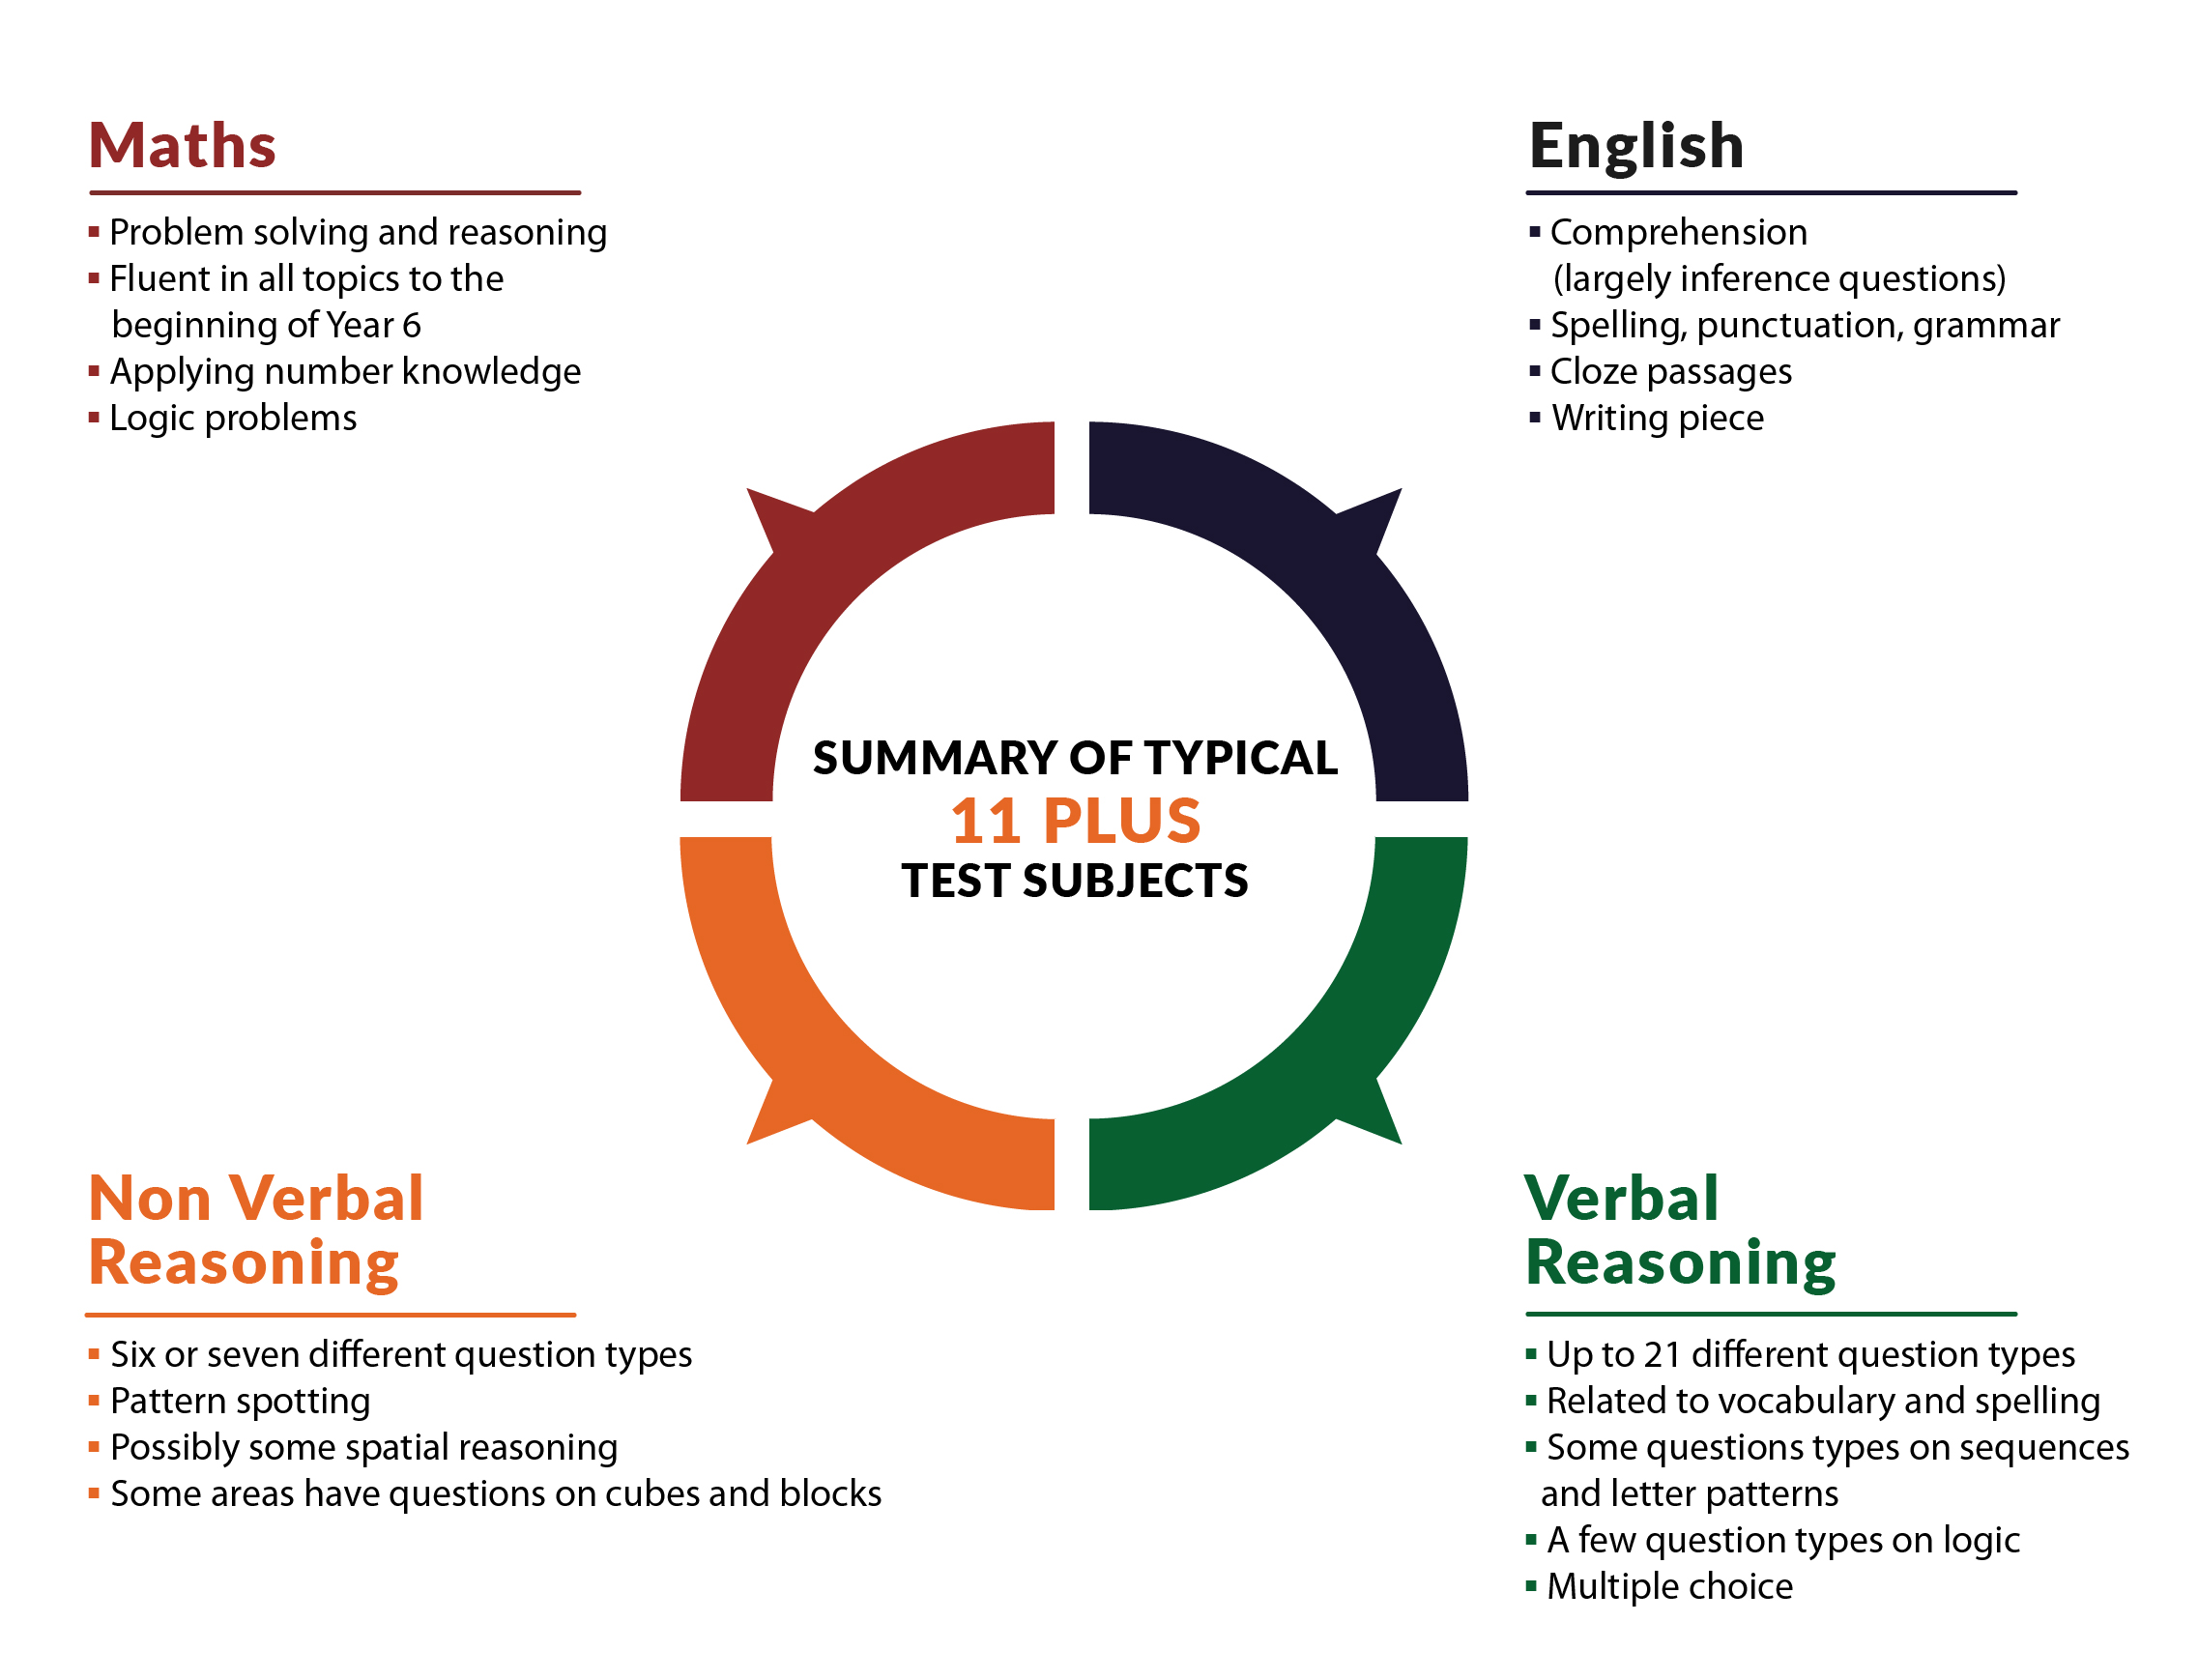 Summary of typical subjects tested within the the 11 plus